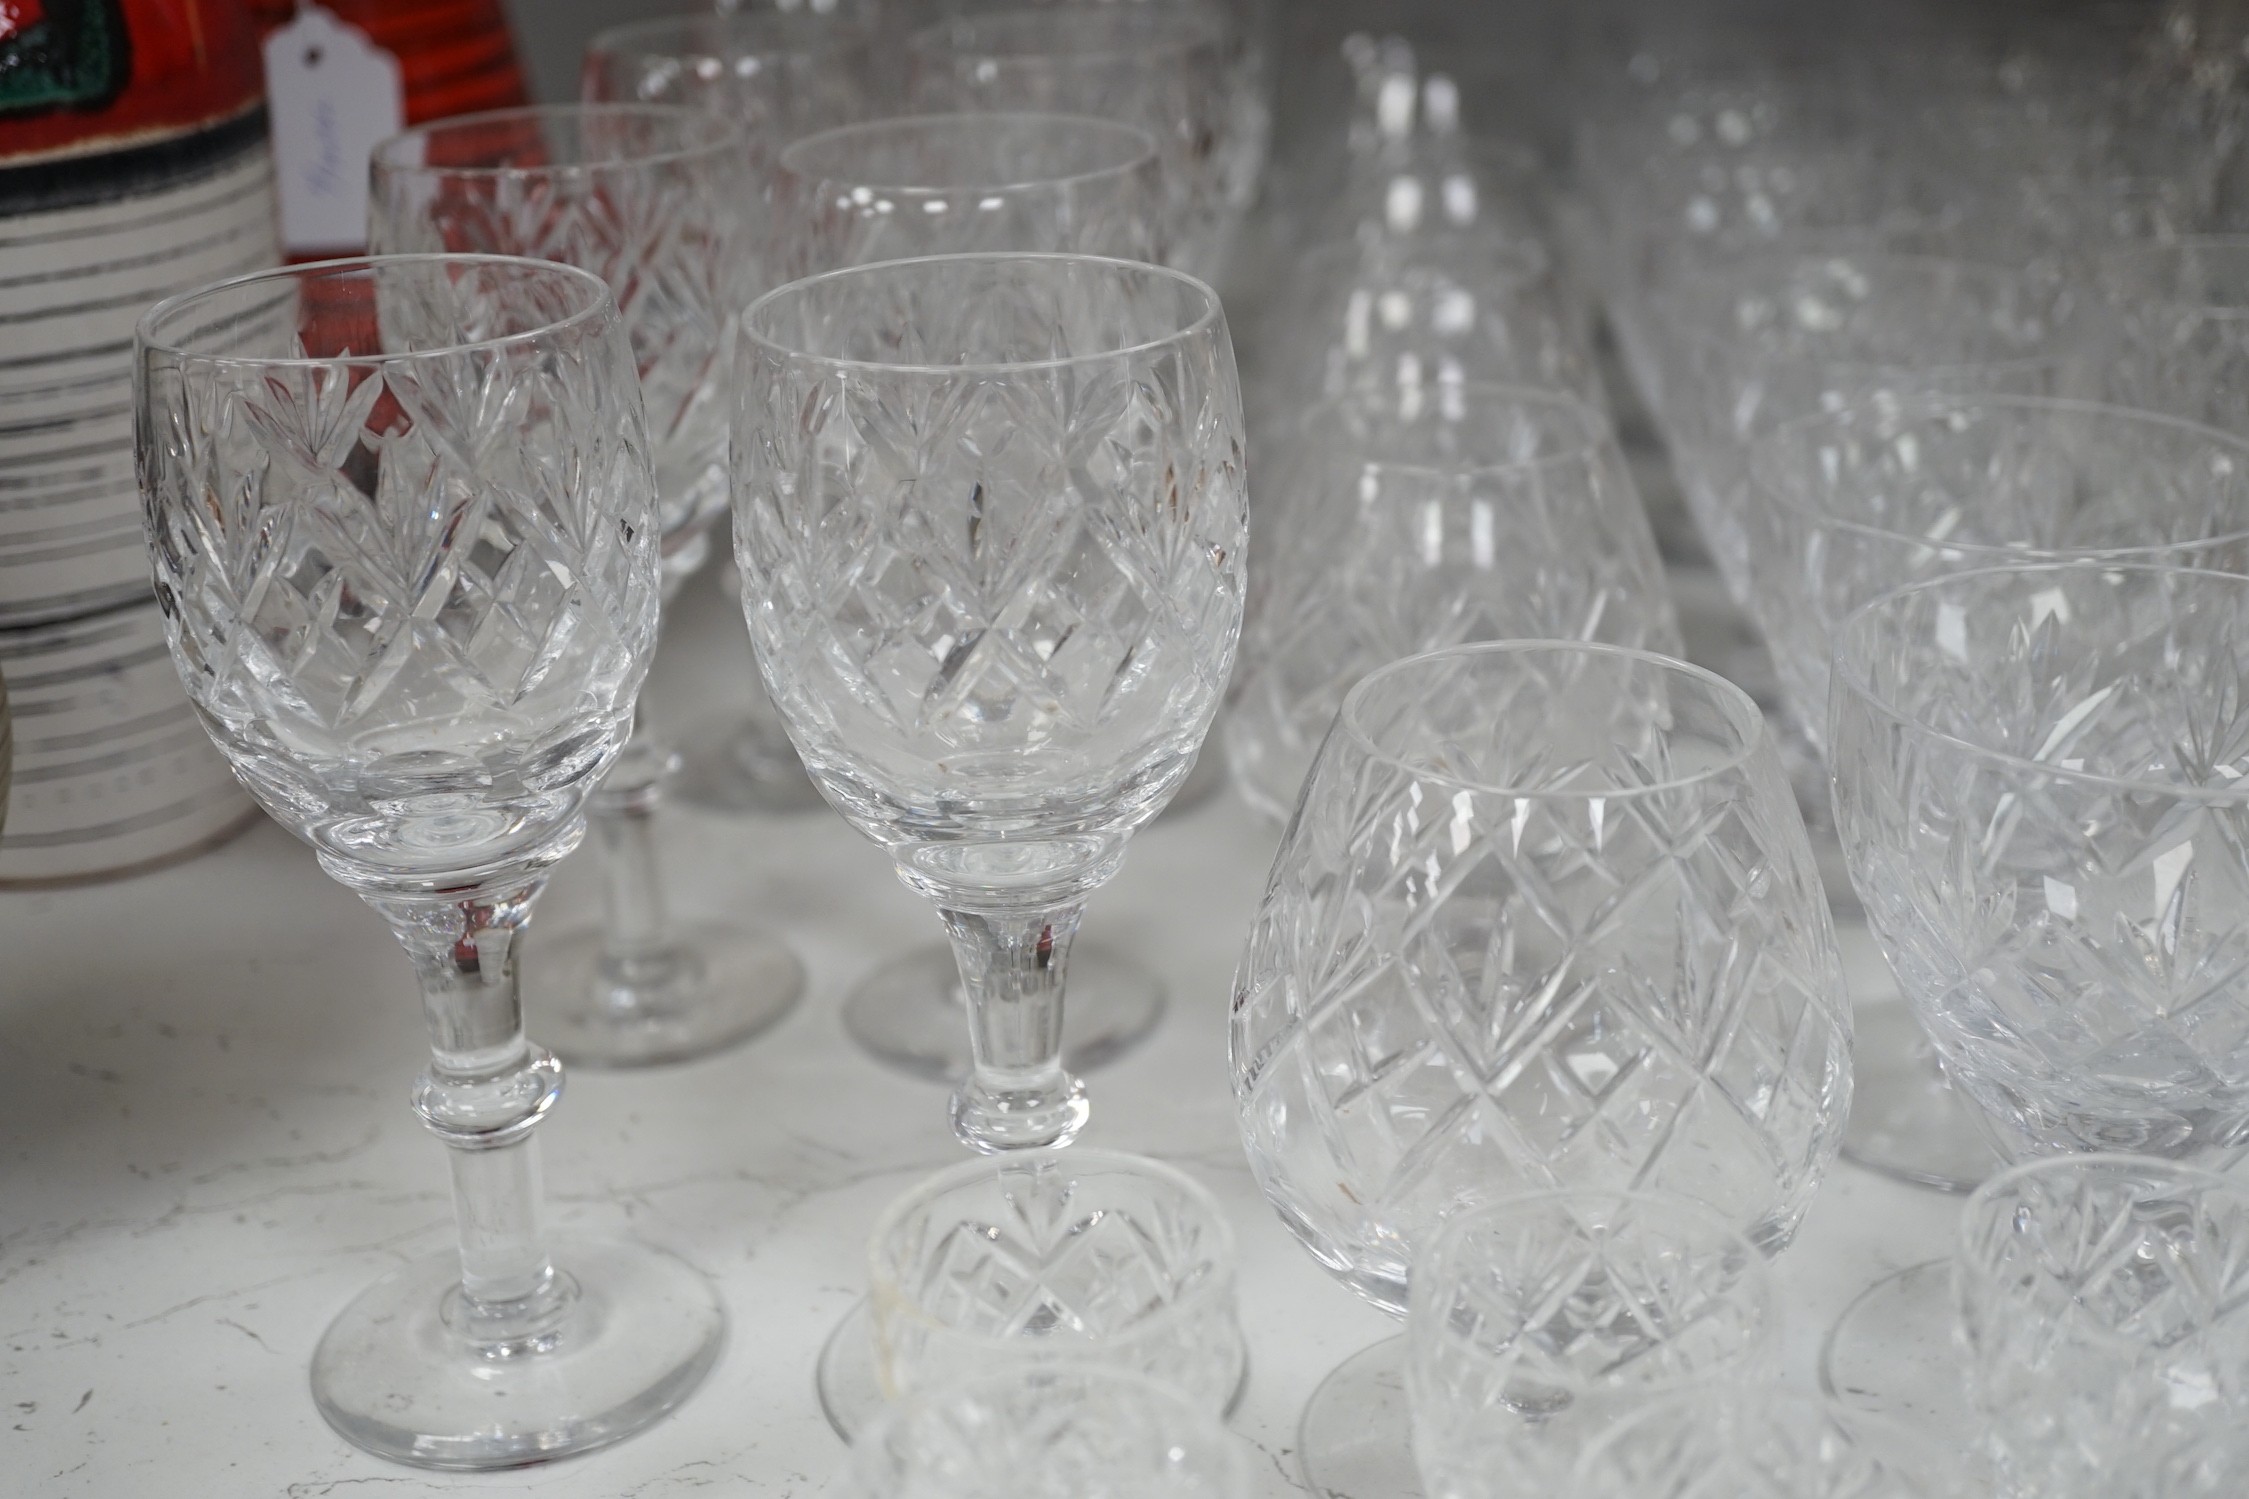 A collection of Royal Doulton glassware, to include: wine glasses, brandy balloons, etc.